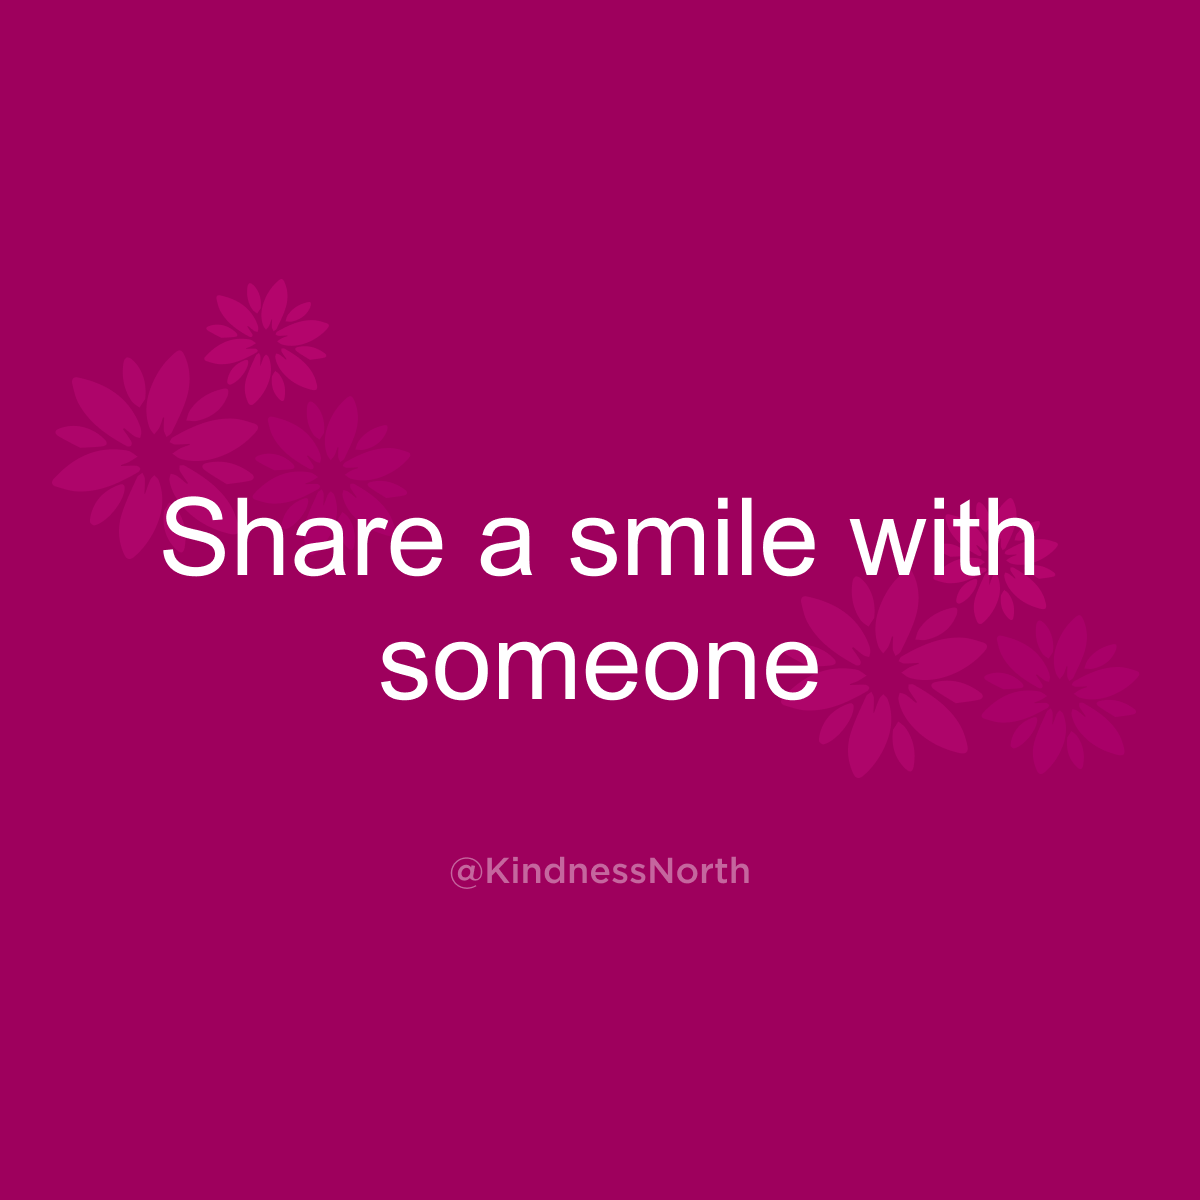 Share a smile with someone